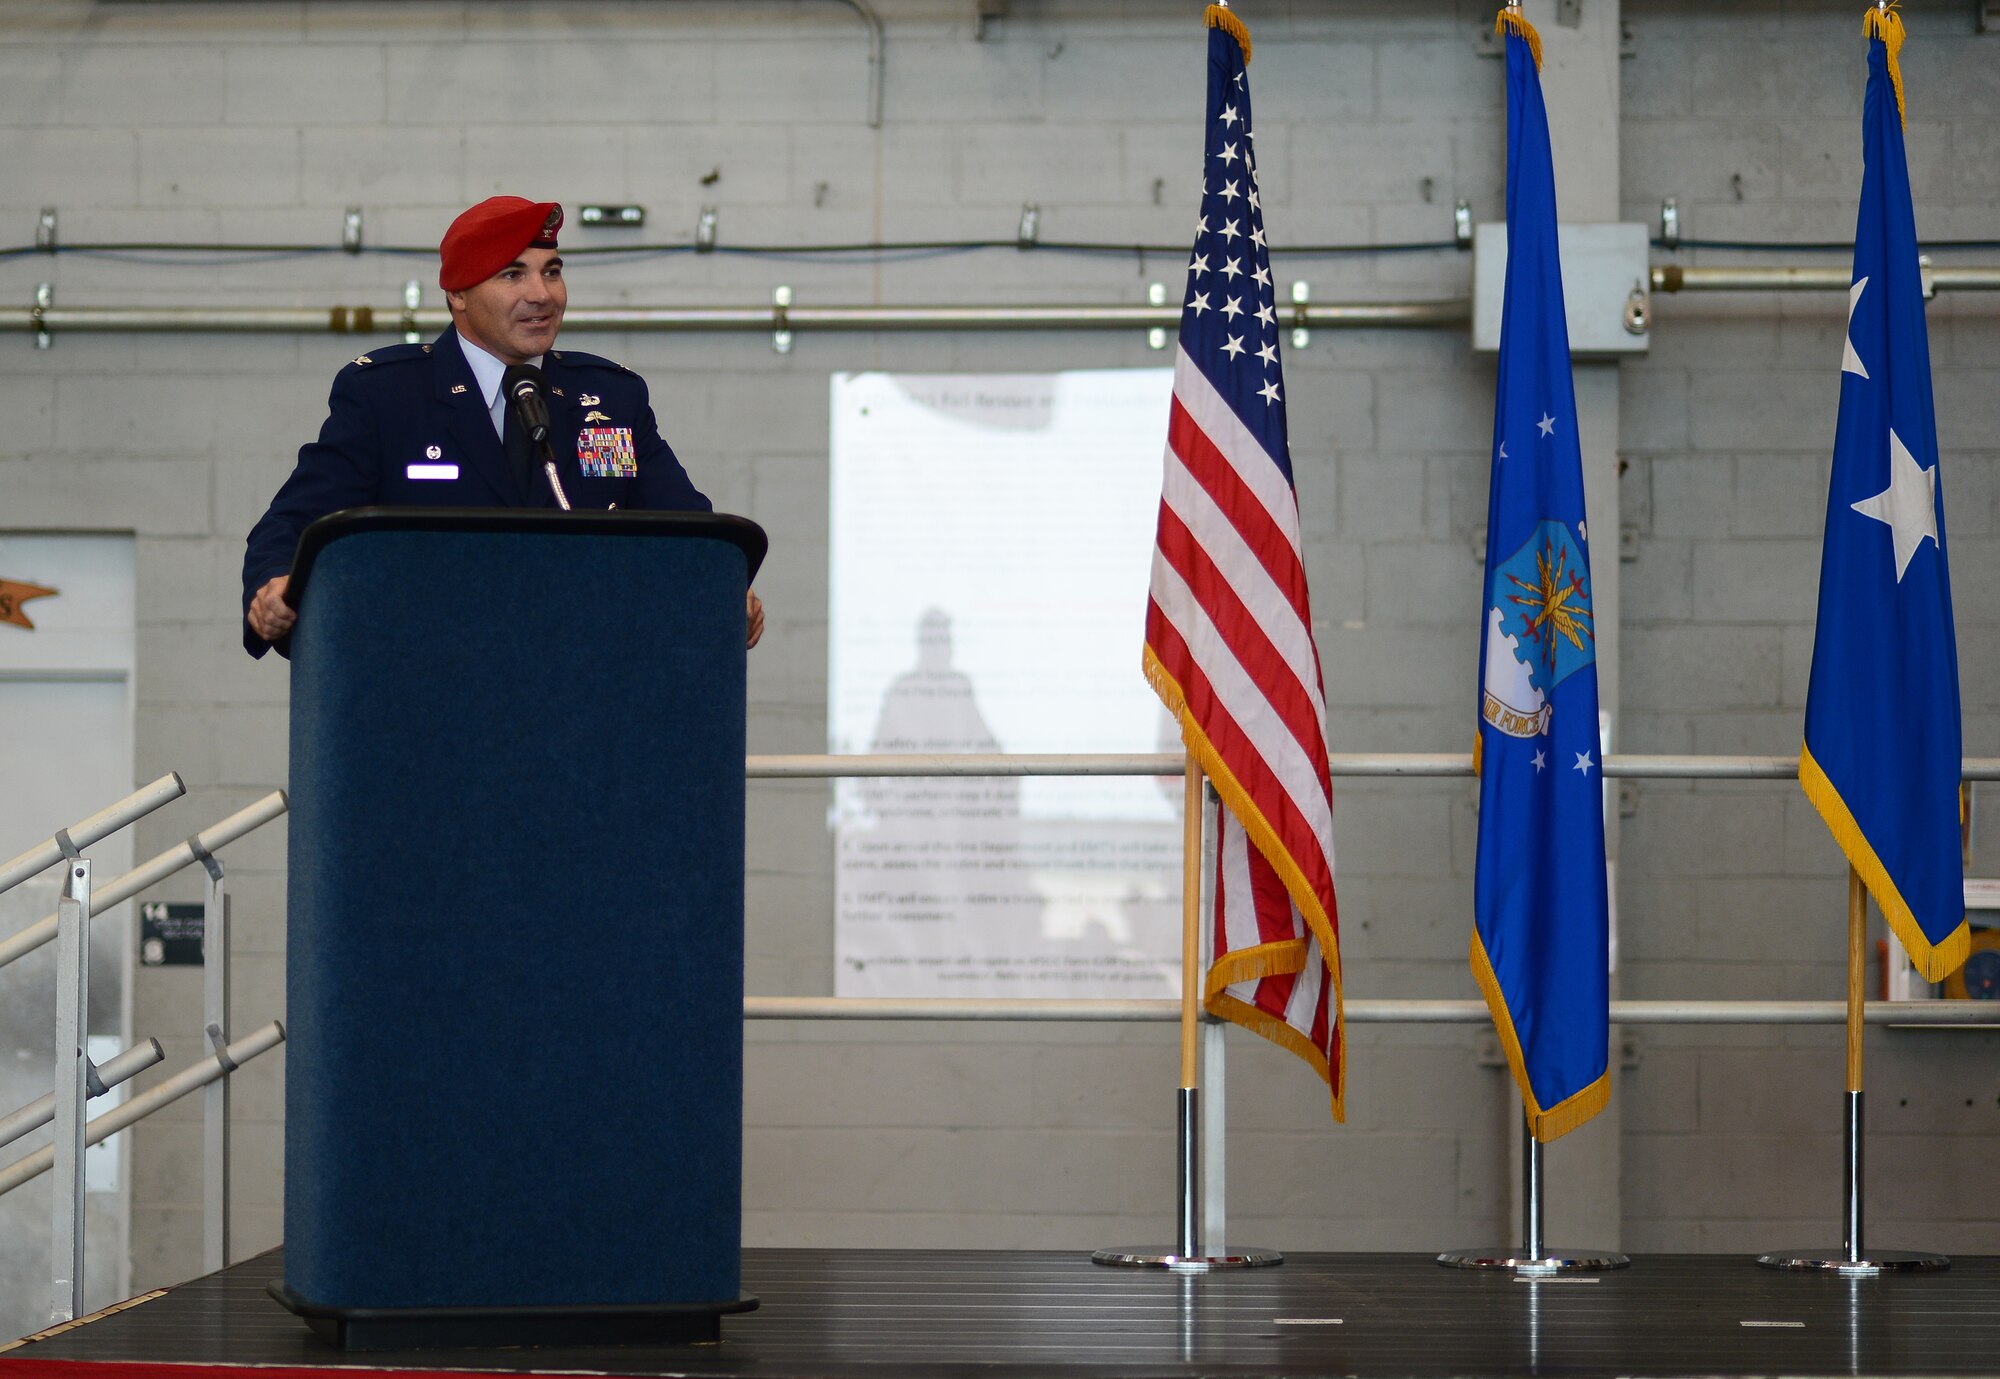 Col. Matthew "Wolfe" Davidson speaks to members of his wing during his assumption of command ceremony Sept. 19, 2014 at Hurlburt Field, Fla.